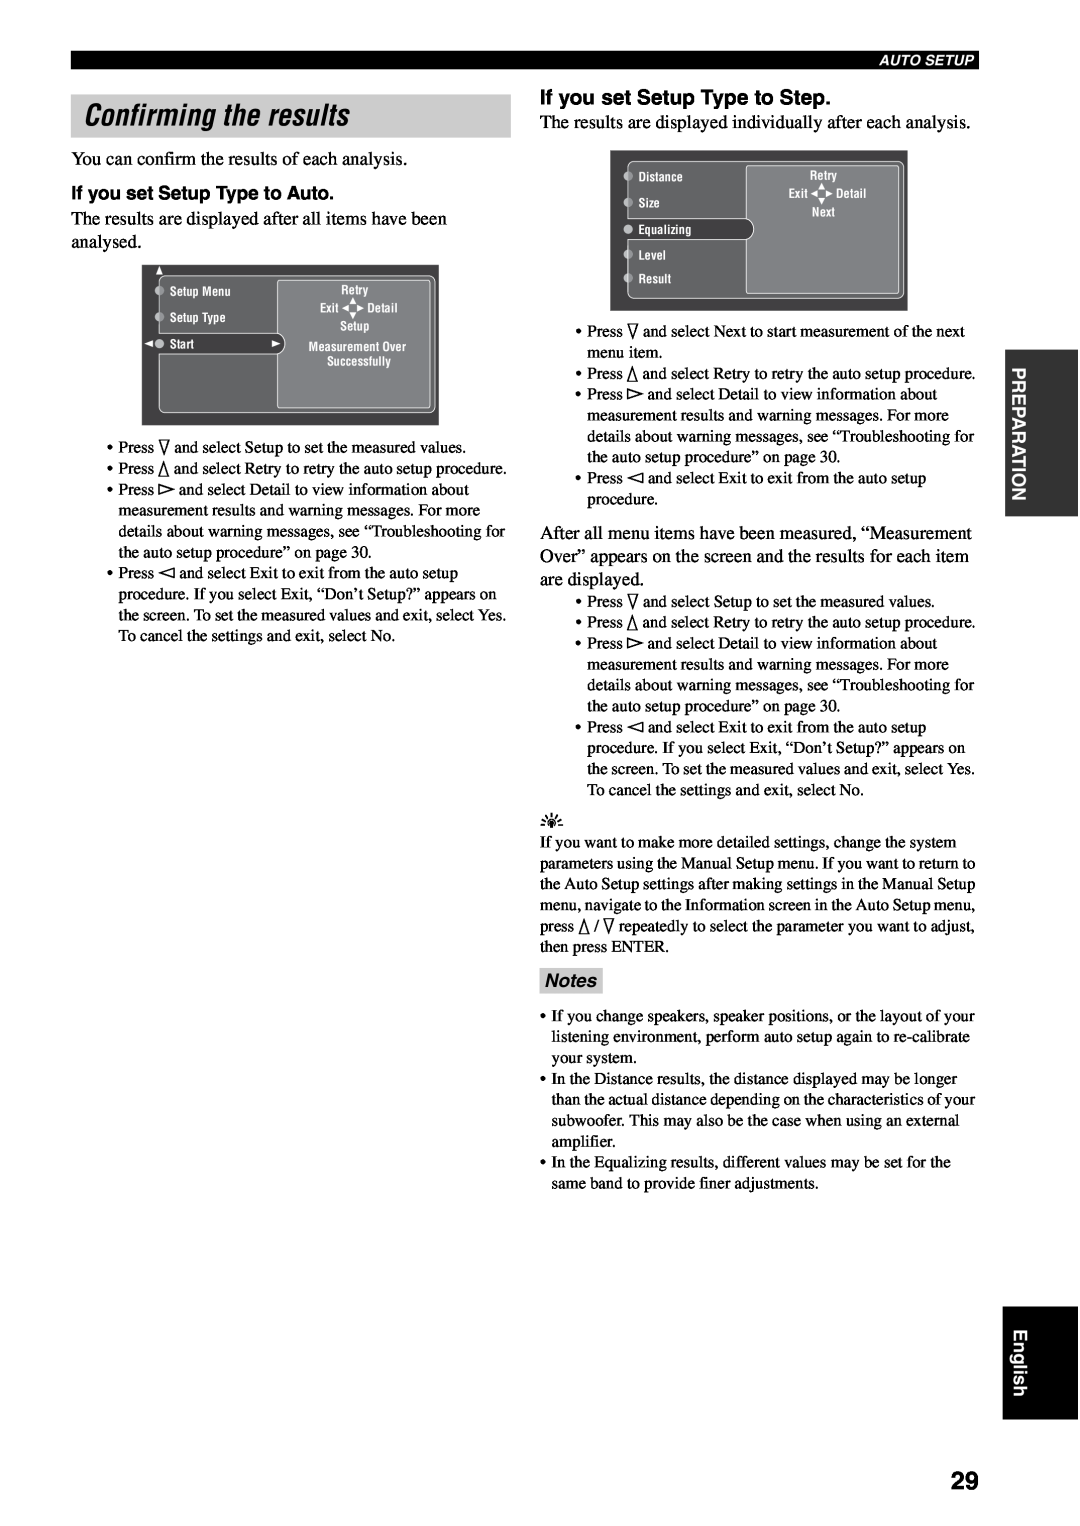 Yamaha RX-V2500 owner manual Confirming the results, If you set Setup Type to Step, If you set Setup Type to Auto 